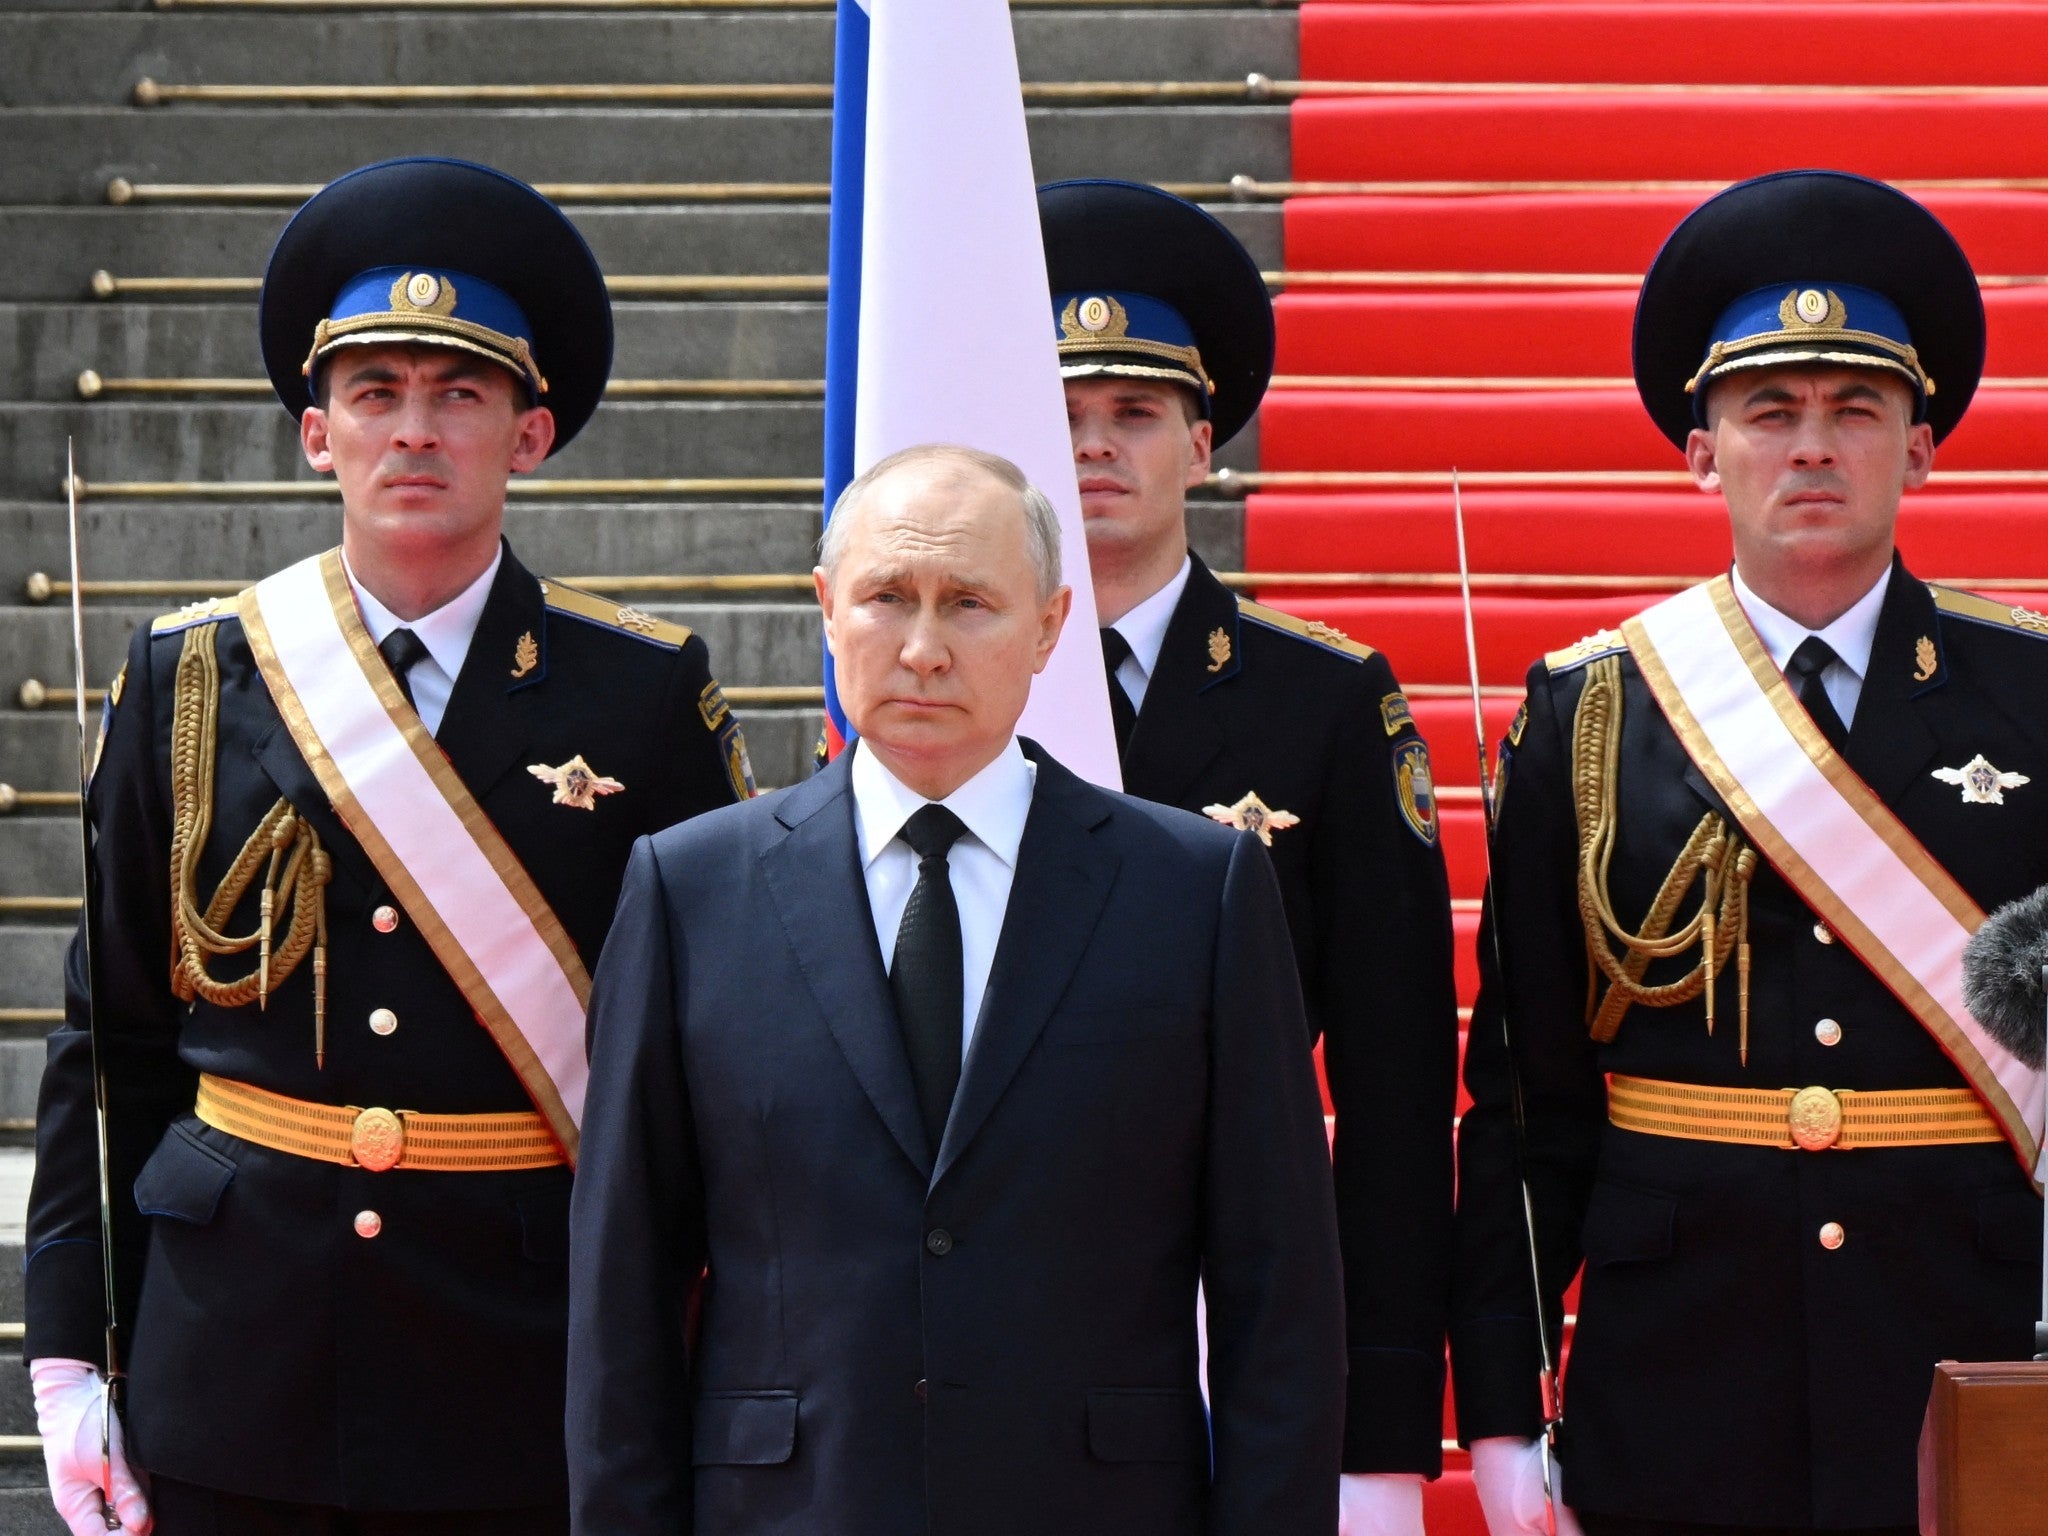 Russian president Vladimir Putin during his address honouring Russia’s armed forces outside the Kremlin